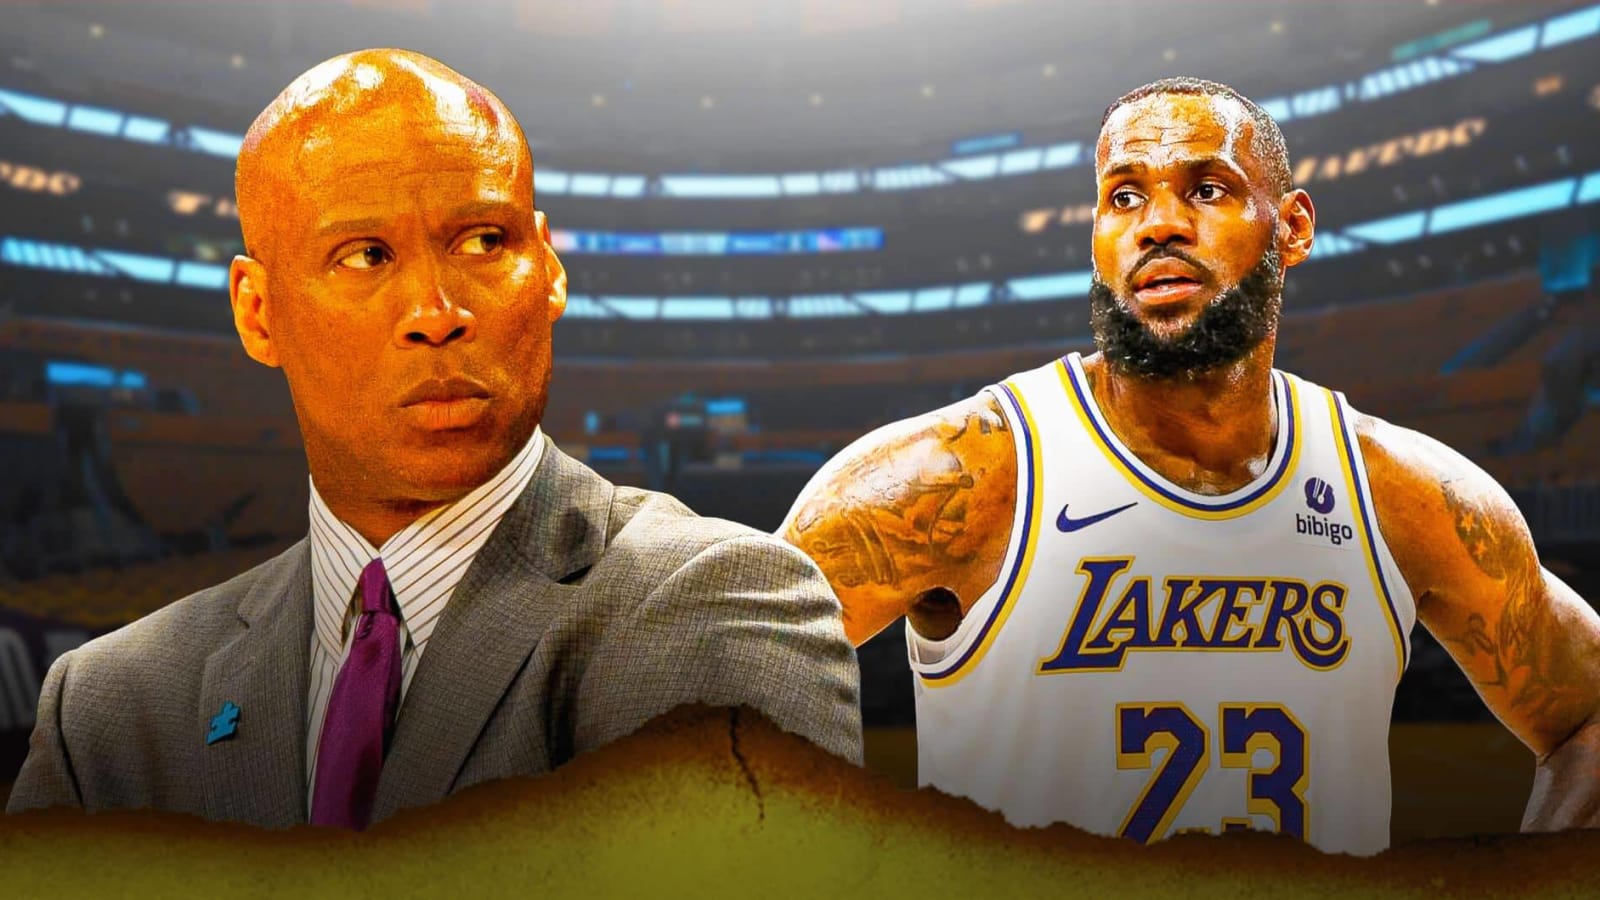 LeBron James should be the next Lakers coach, according to Byron Scott